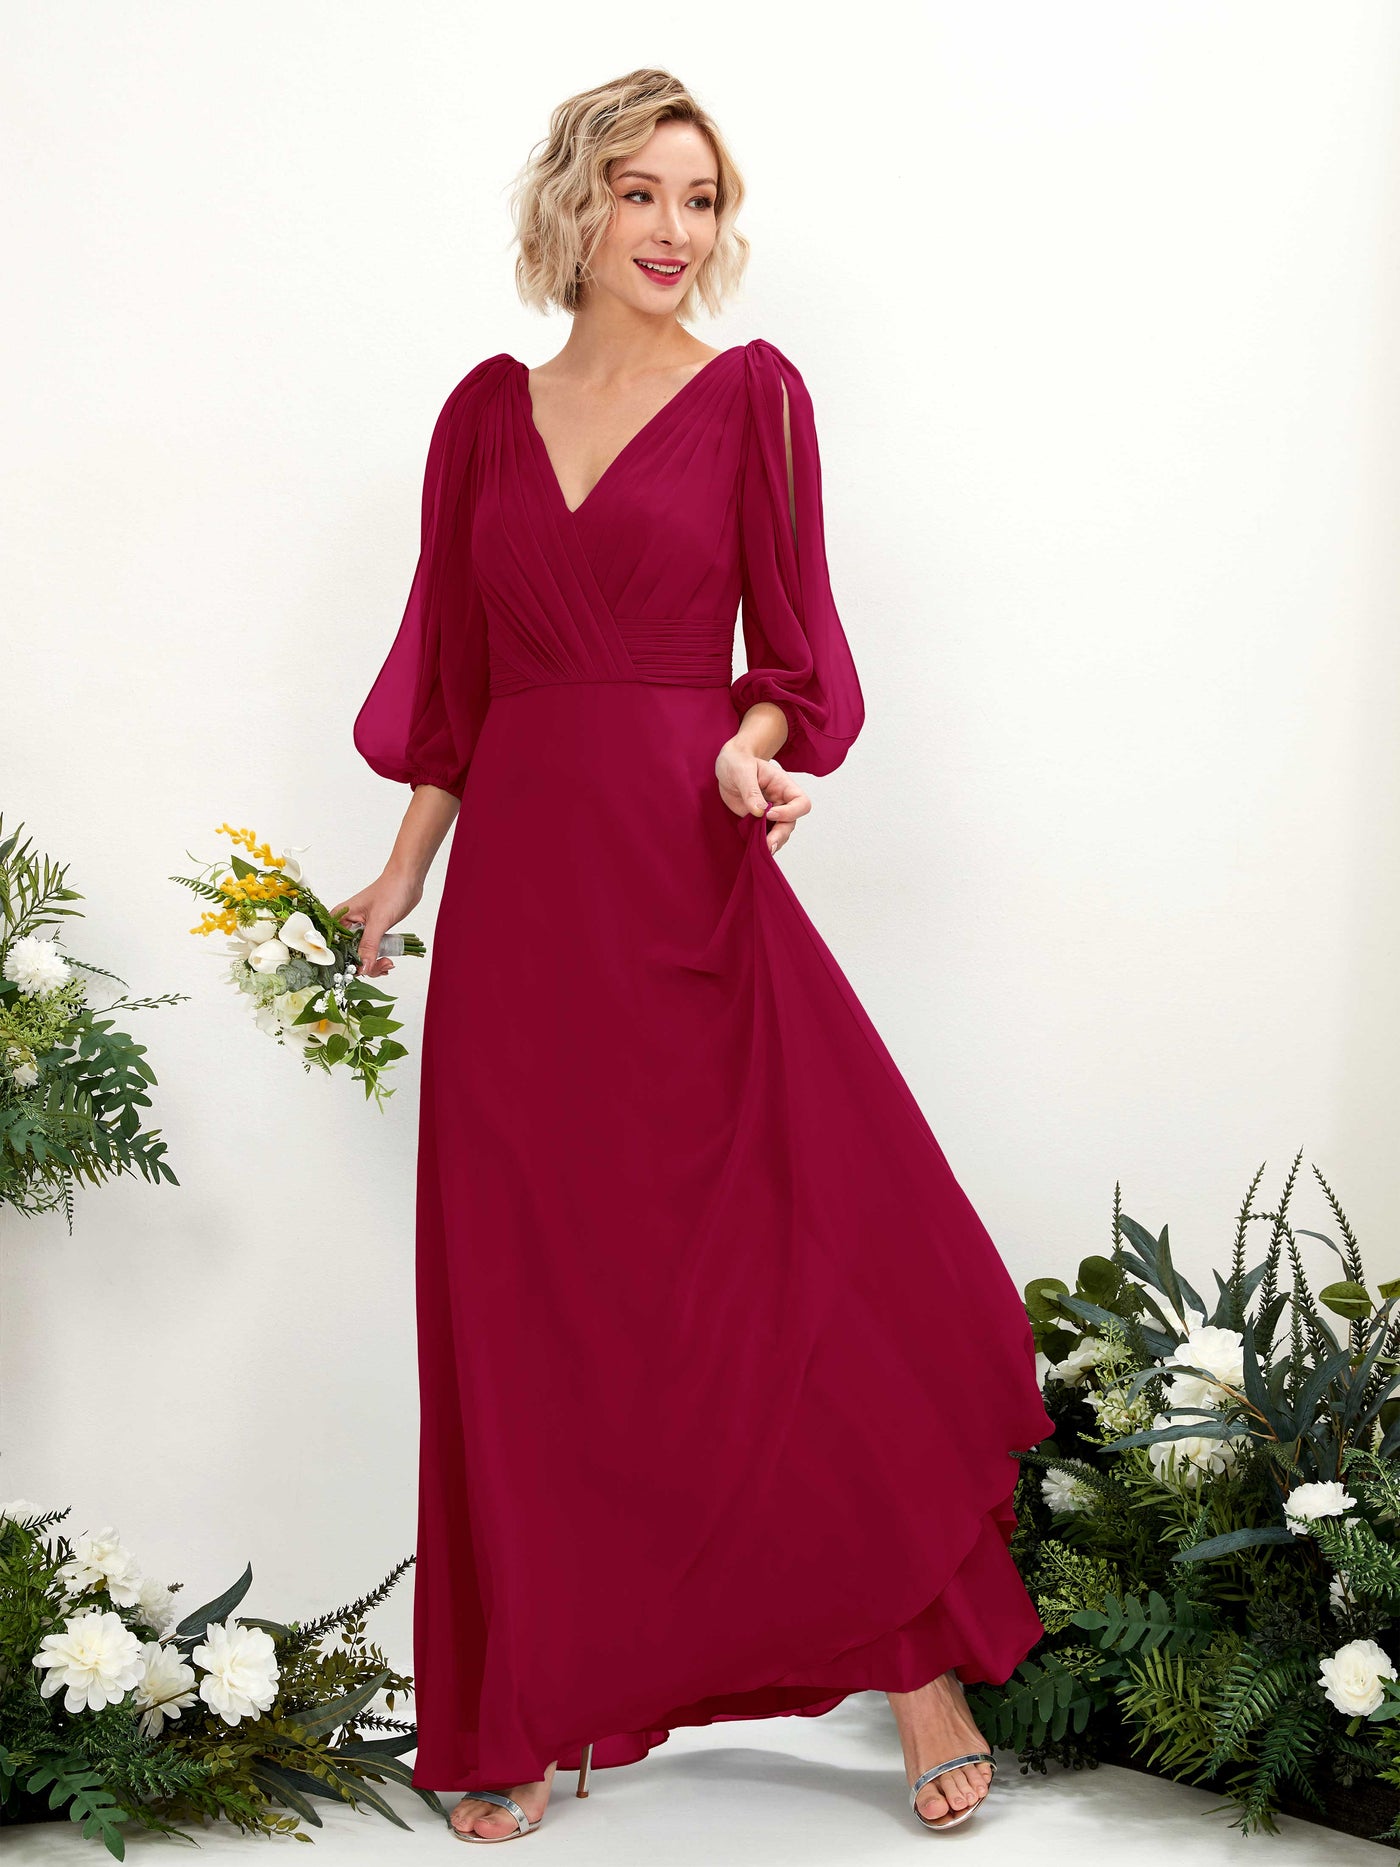 Jester Red Bridesmaid Dresses Bridesmaid Dress Chiffon V-neck Full Length Long Sleeves Wedding Party Dress (81223541)#color_jester-red